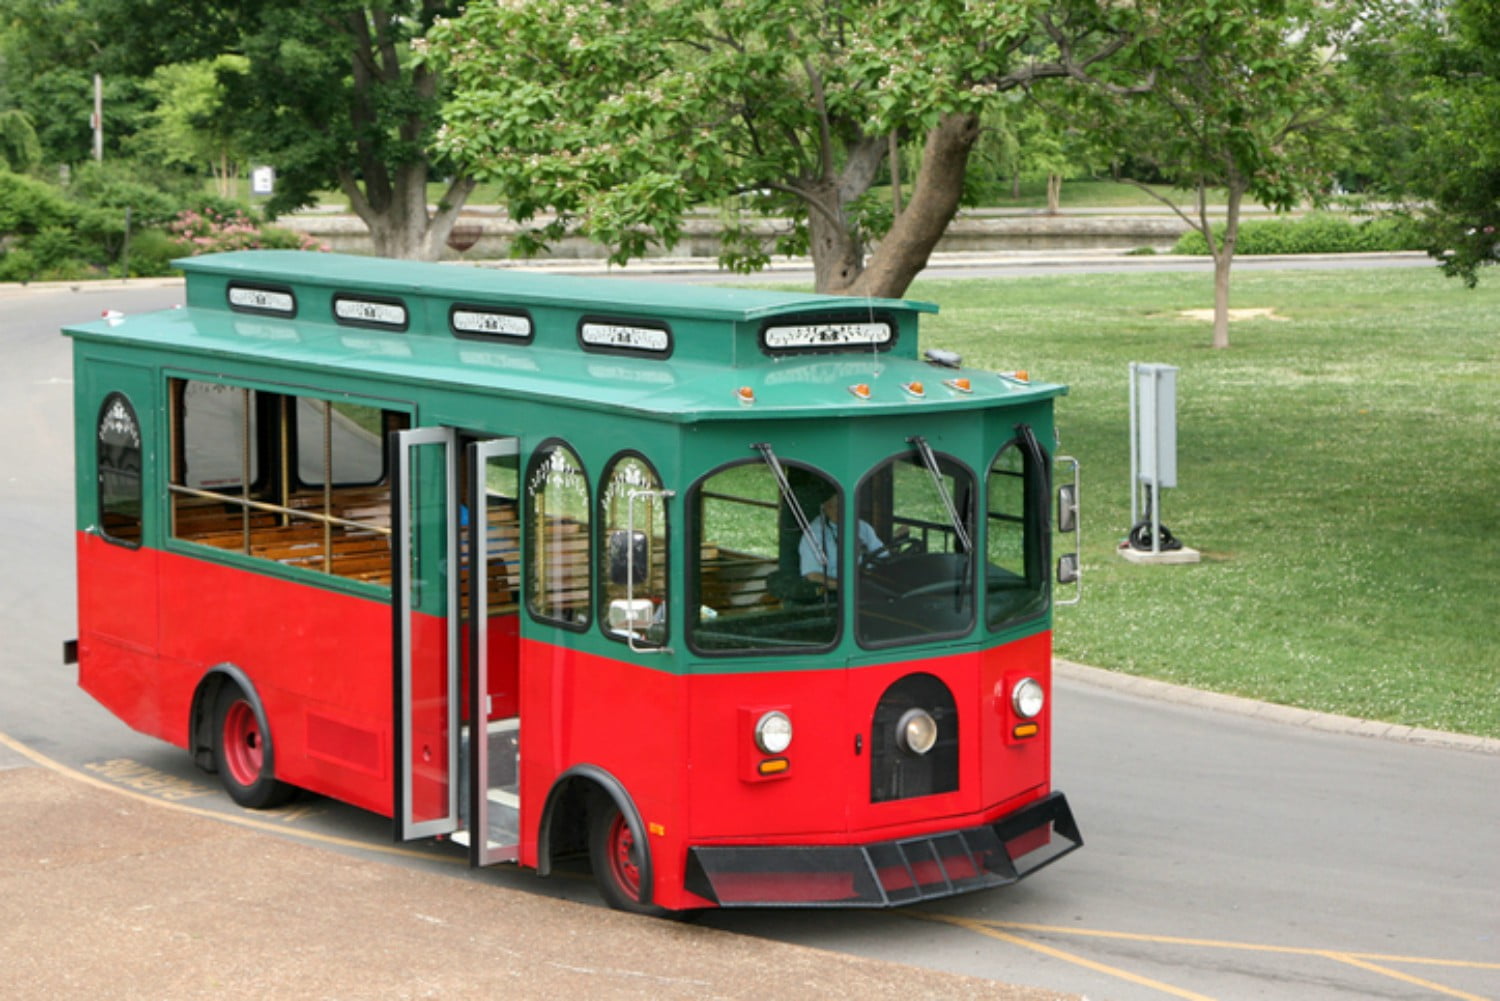 What You Need to Know About Door County Trolley Tours